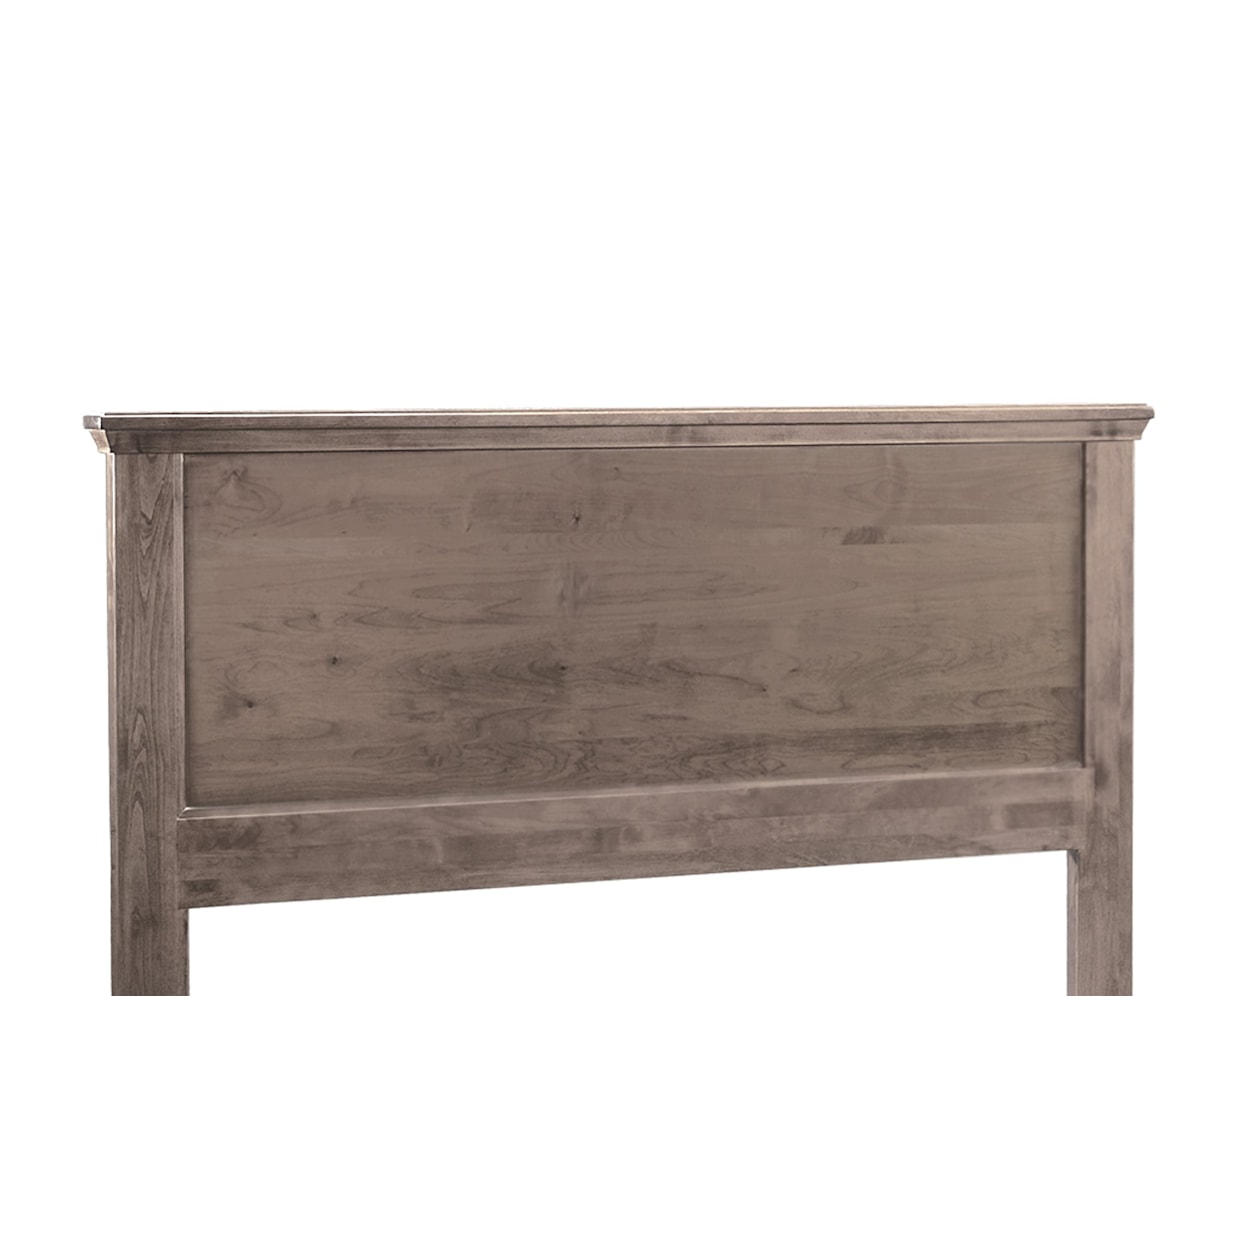 Archbold Furniture Heritage King Plank Headboard Only